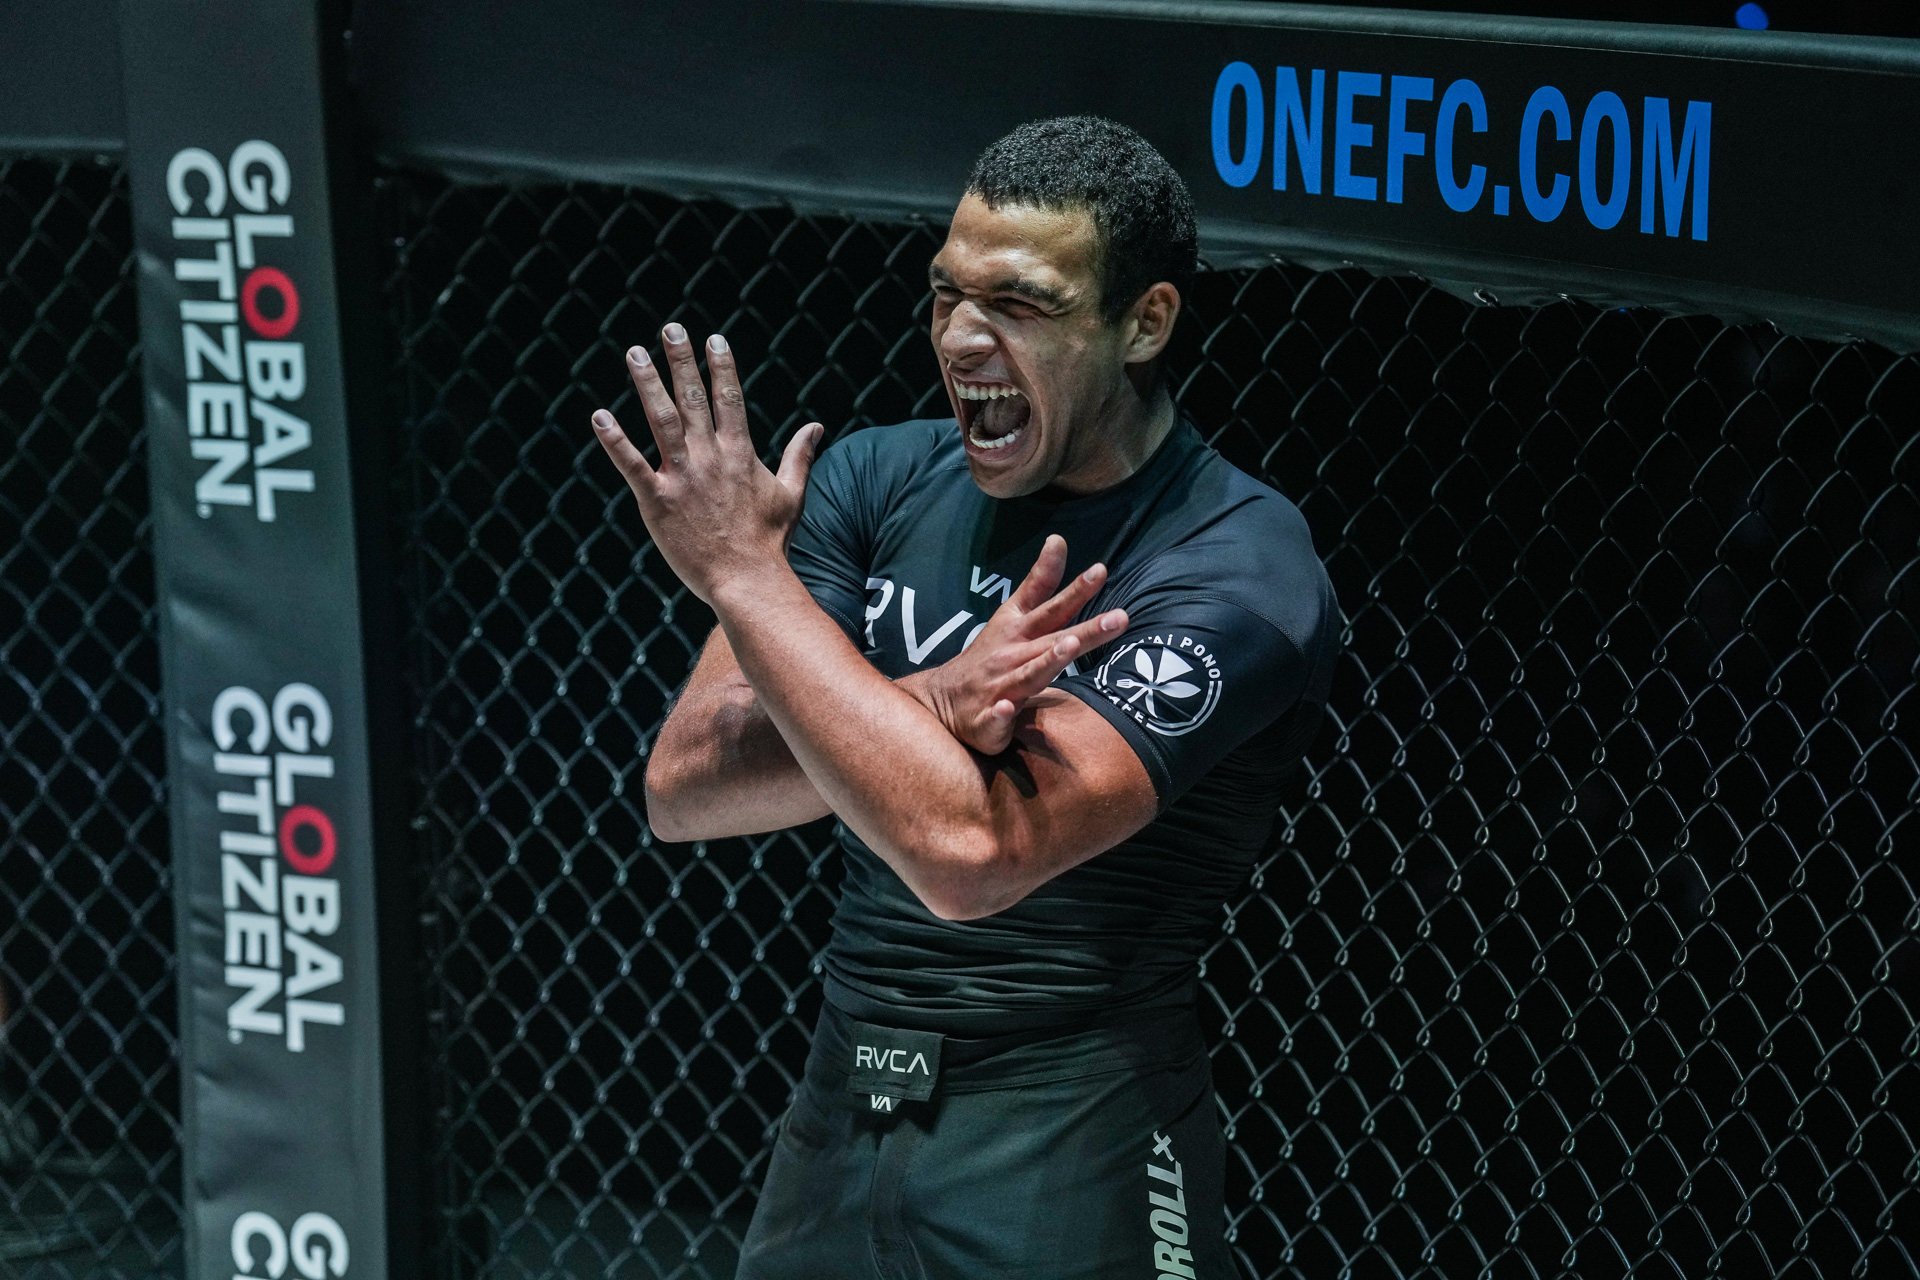 Tye Ruotolo prepares for a grappling match with ONE middleweight MMA champion Reinier de Ridder. Photos: ONE Championship